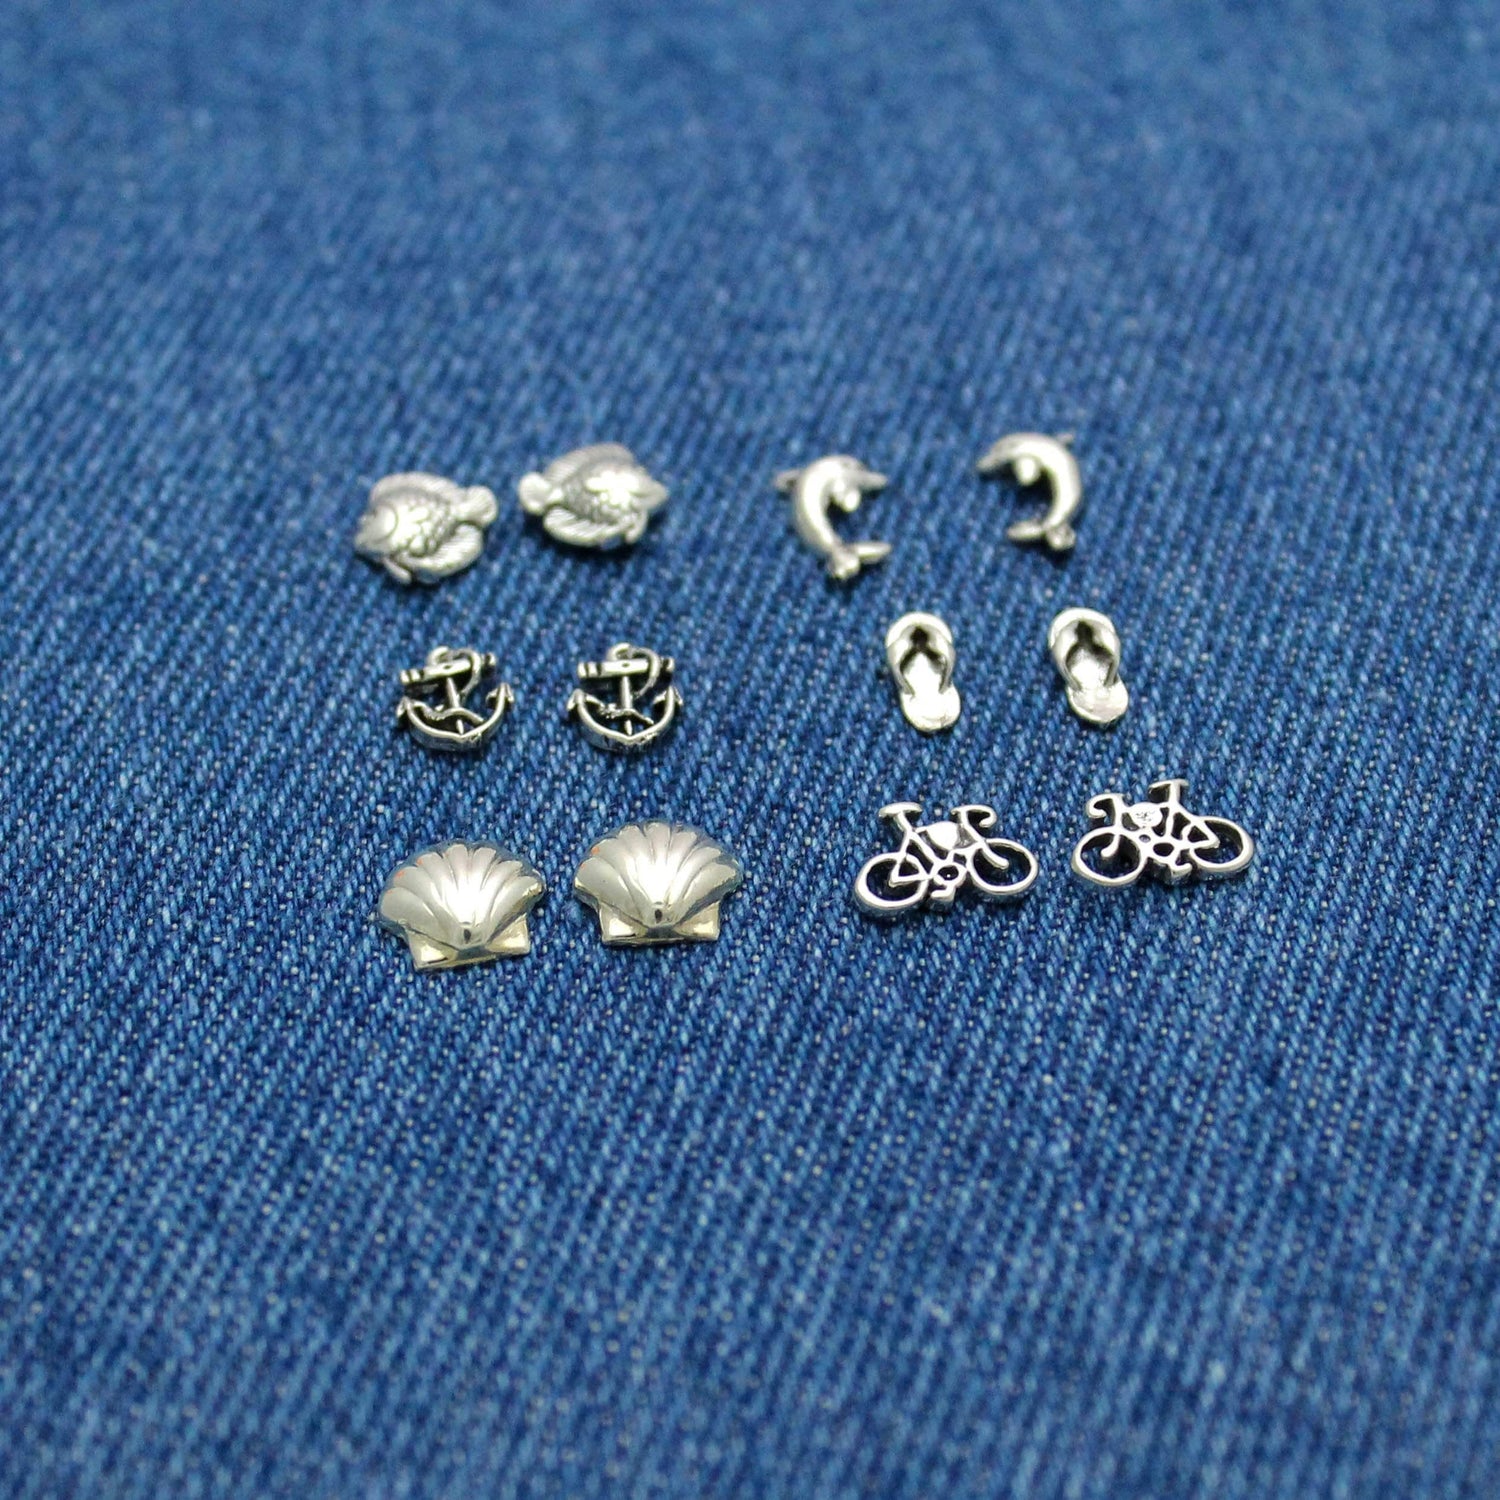 Cute Beach Studs in Sterling Silver, Shells, Anchors, Tropical Fish, Dolphins, Flip Flops, & Bicycles, Silver Stud Earrings, Gift for Her